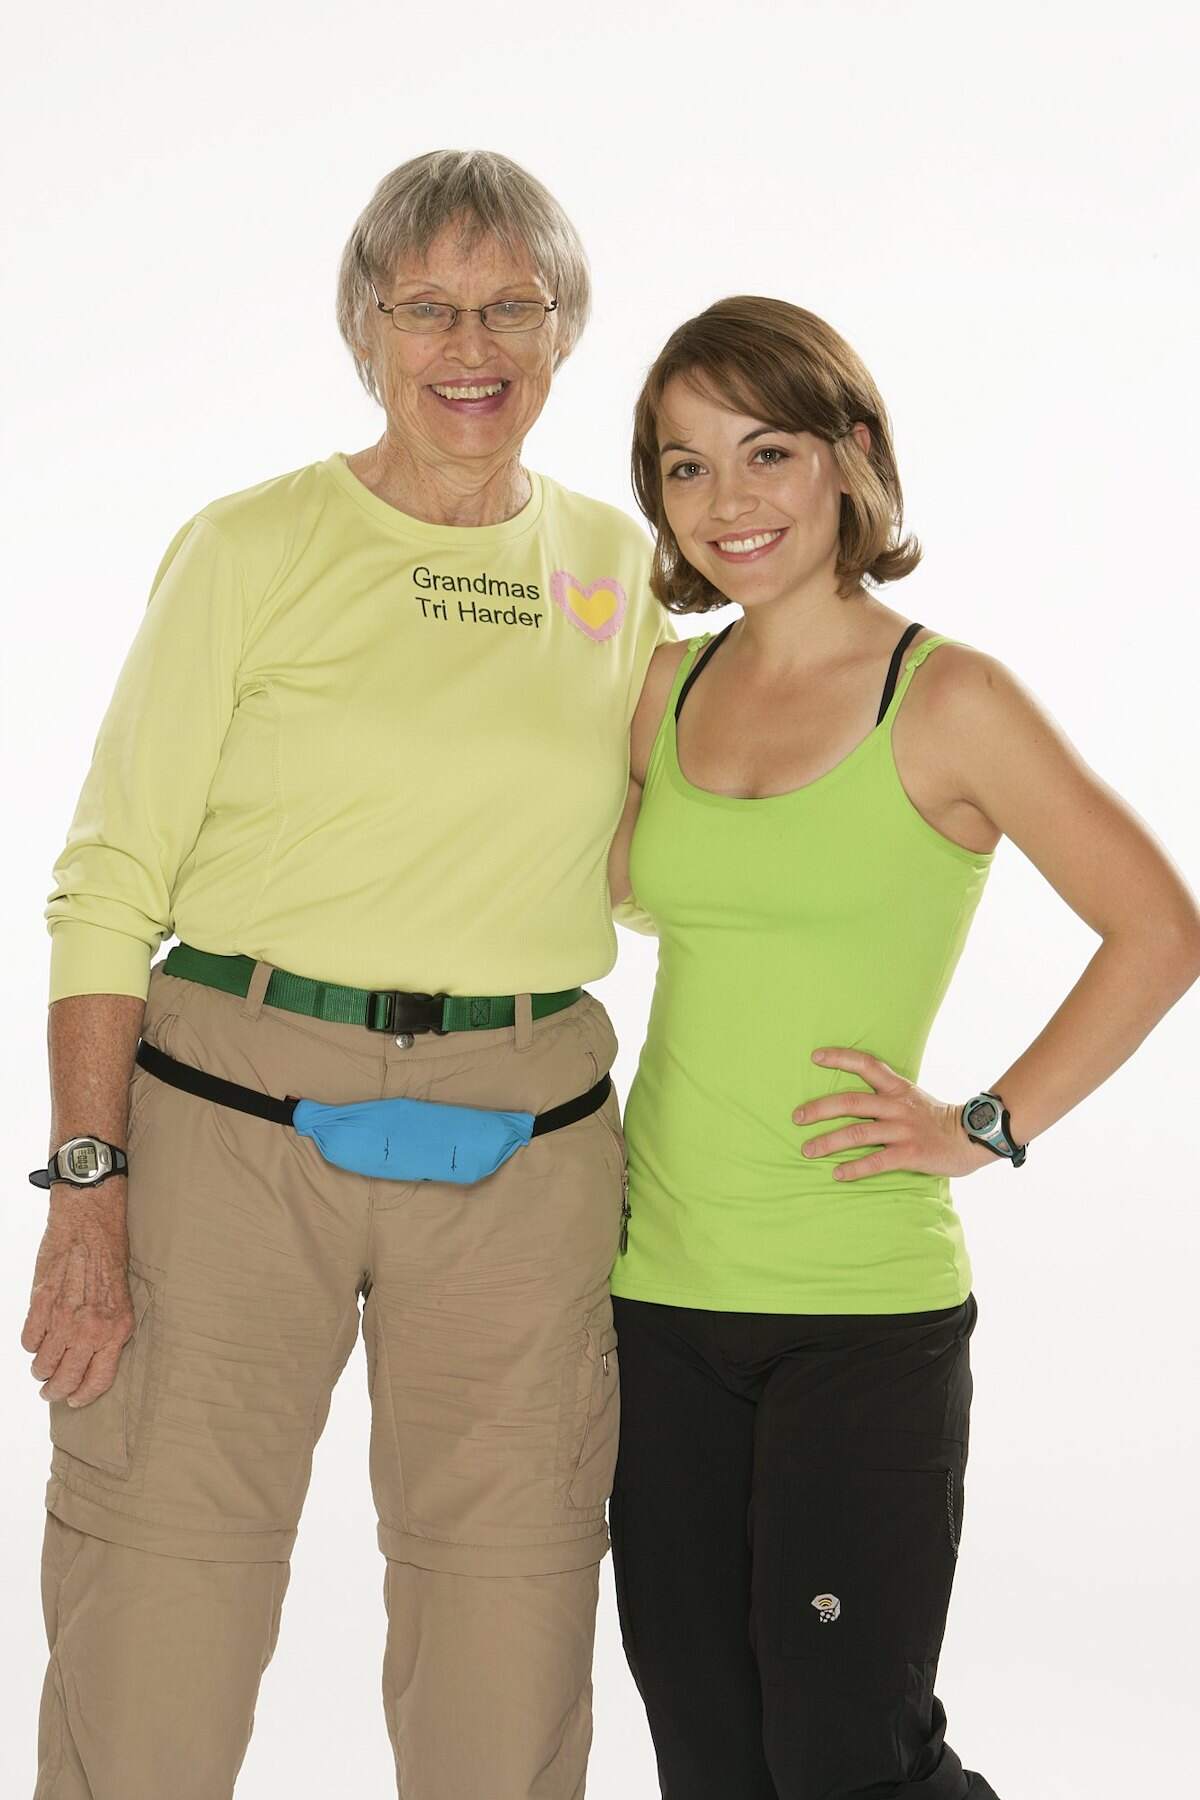 A grandmother and granddaughter from Texas, Jody Kelly, (L), a 71 year-old personal trainer and Shannon Foster, a 22 year-old in health insurance, pose for their team photo on The Amazing Race